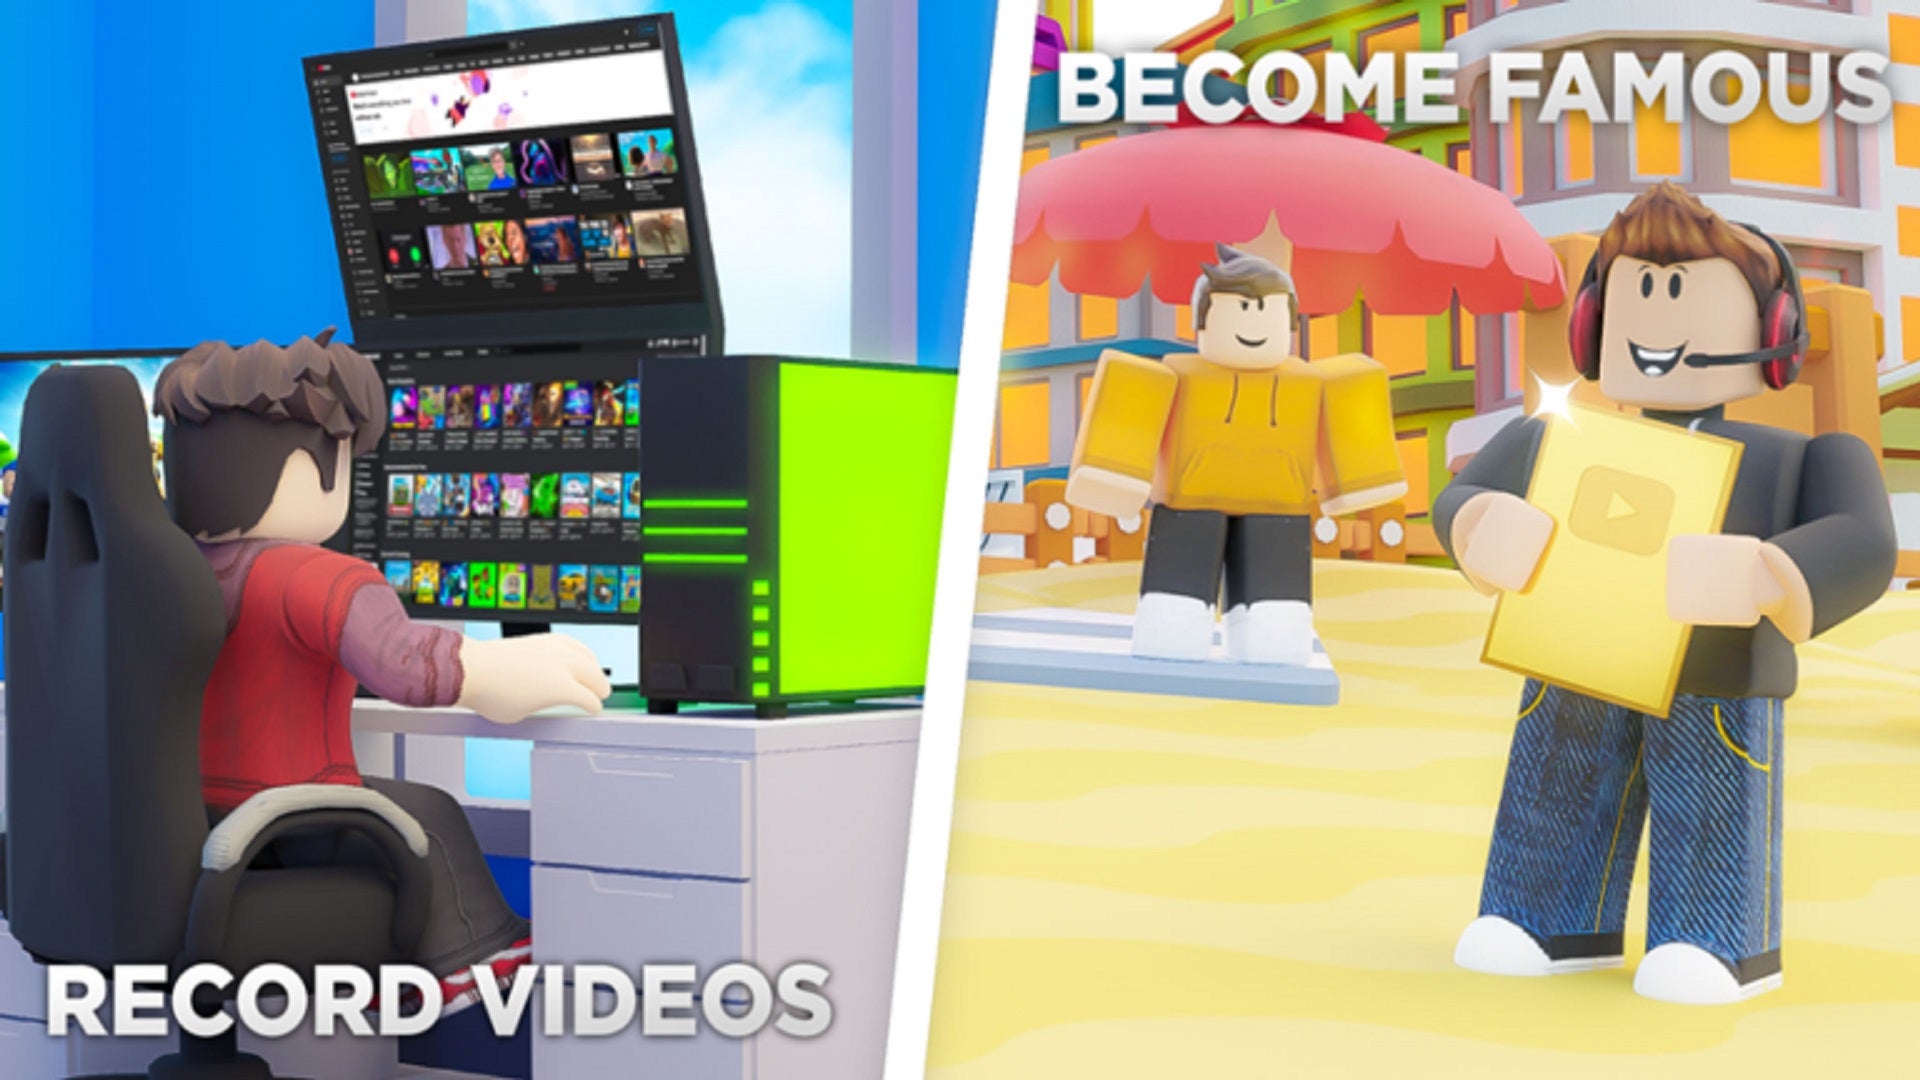 The Roblox banner for the YouTube Life experience. On the left, a character sits at a gaming computer recording a video. On the right, a character receives a Golden Play button for their YouTube fame.